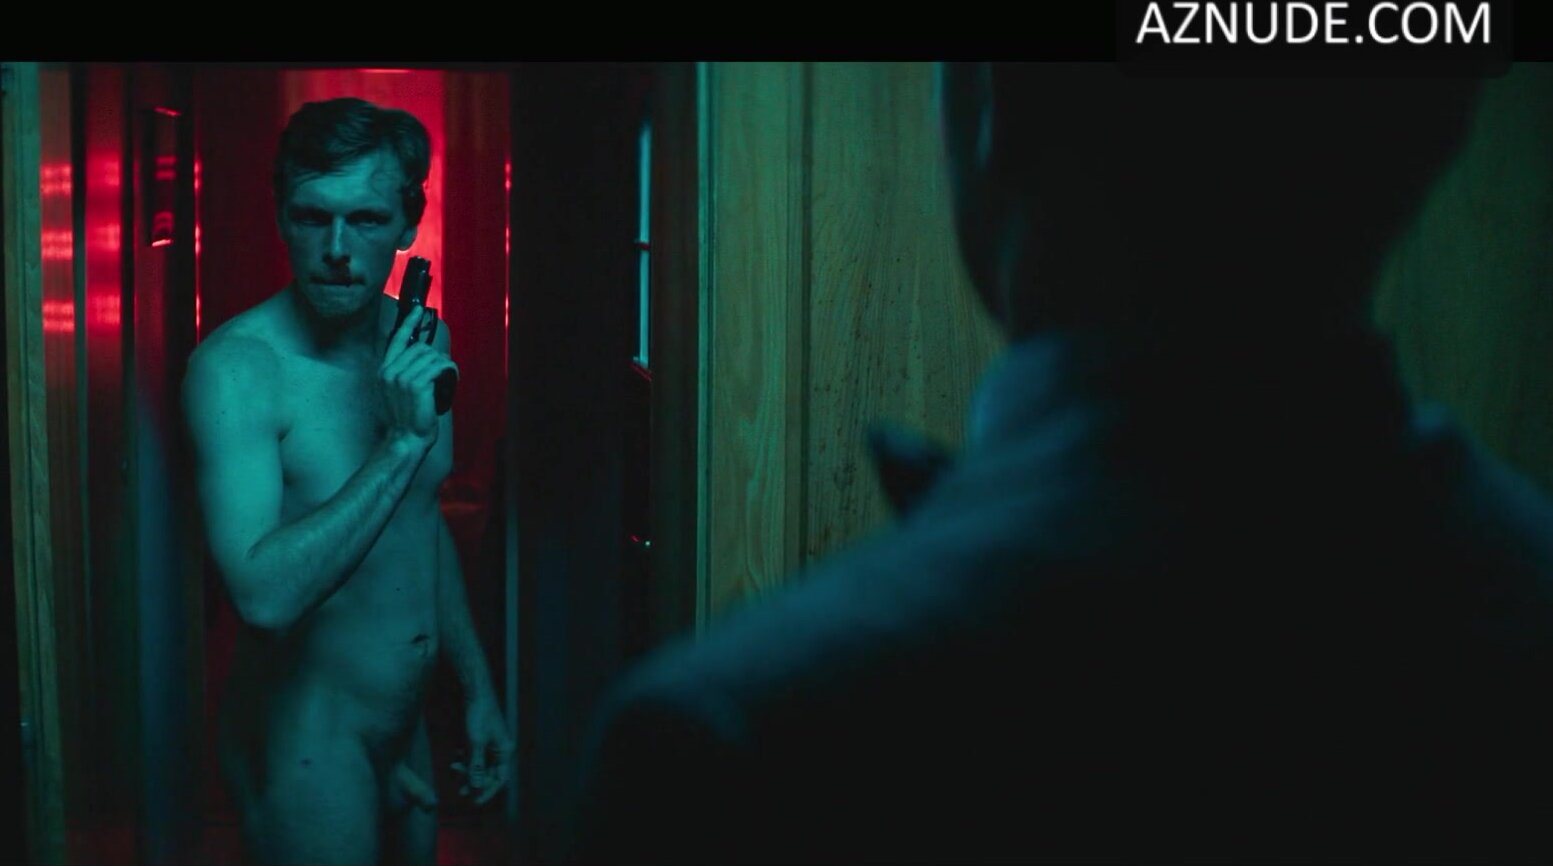 Polish actor full frontal nude in movie